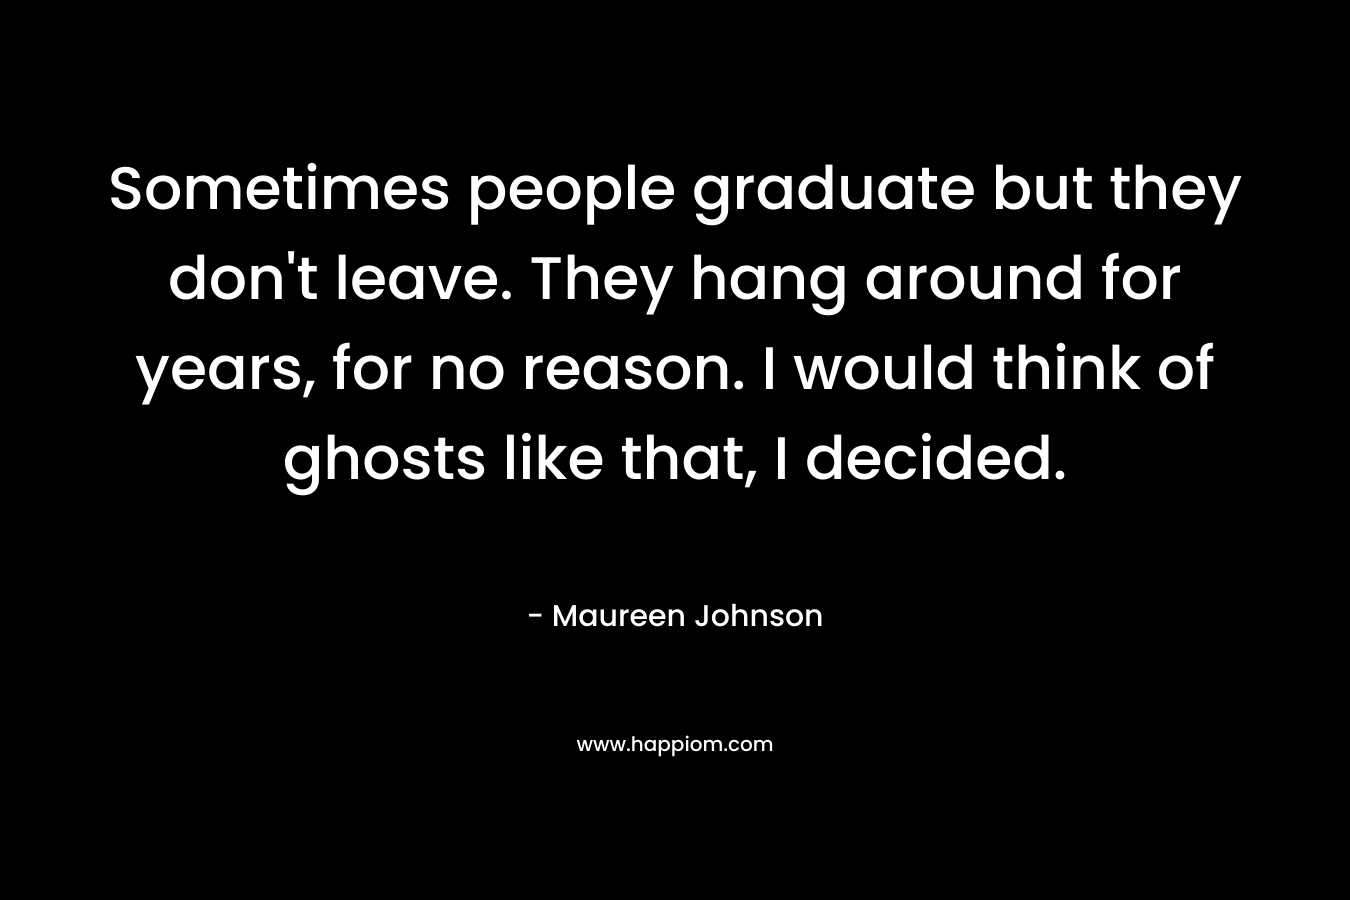 Sometimes people graduate but they don’t leave. They hang around for years, for no reason. I would think of ghosts like that, I decided. – Maureen Johnson